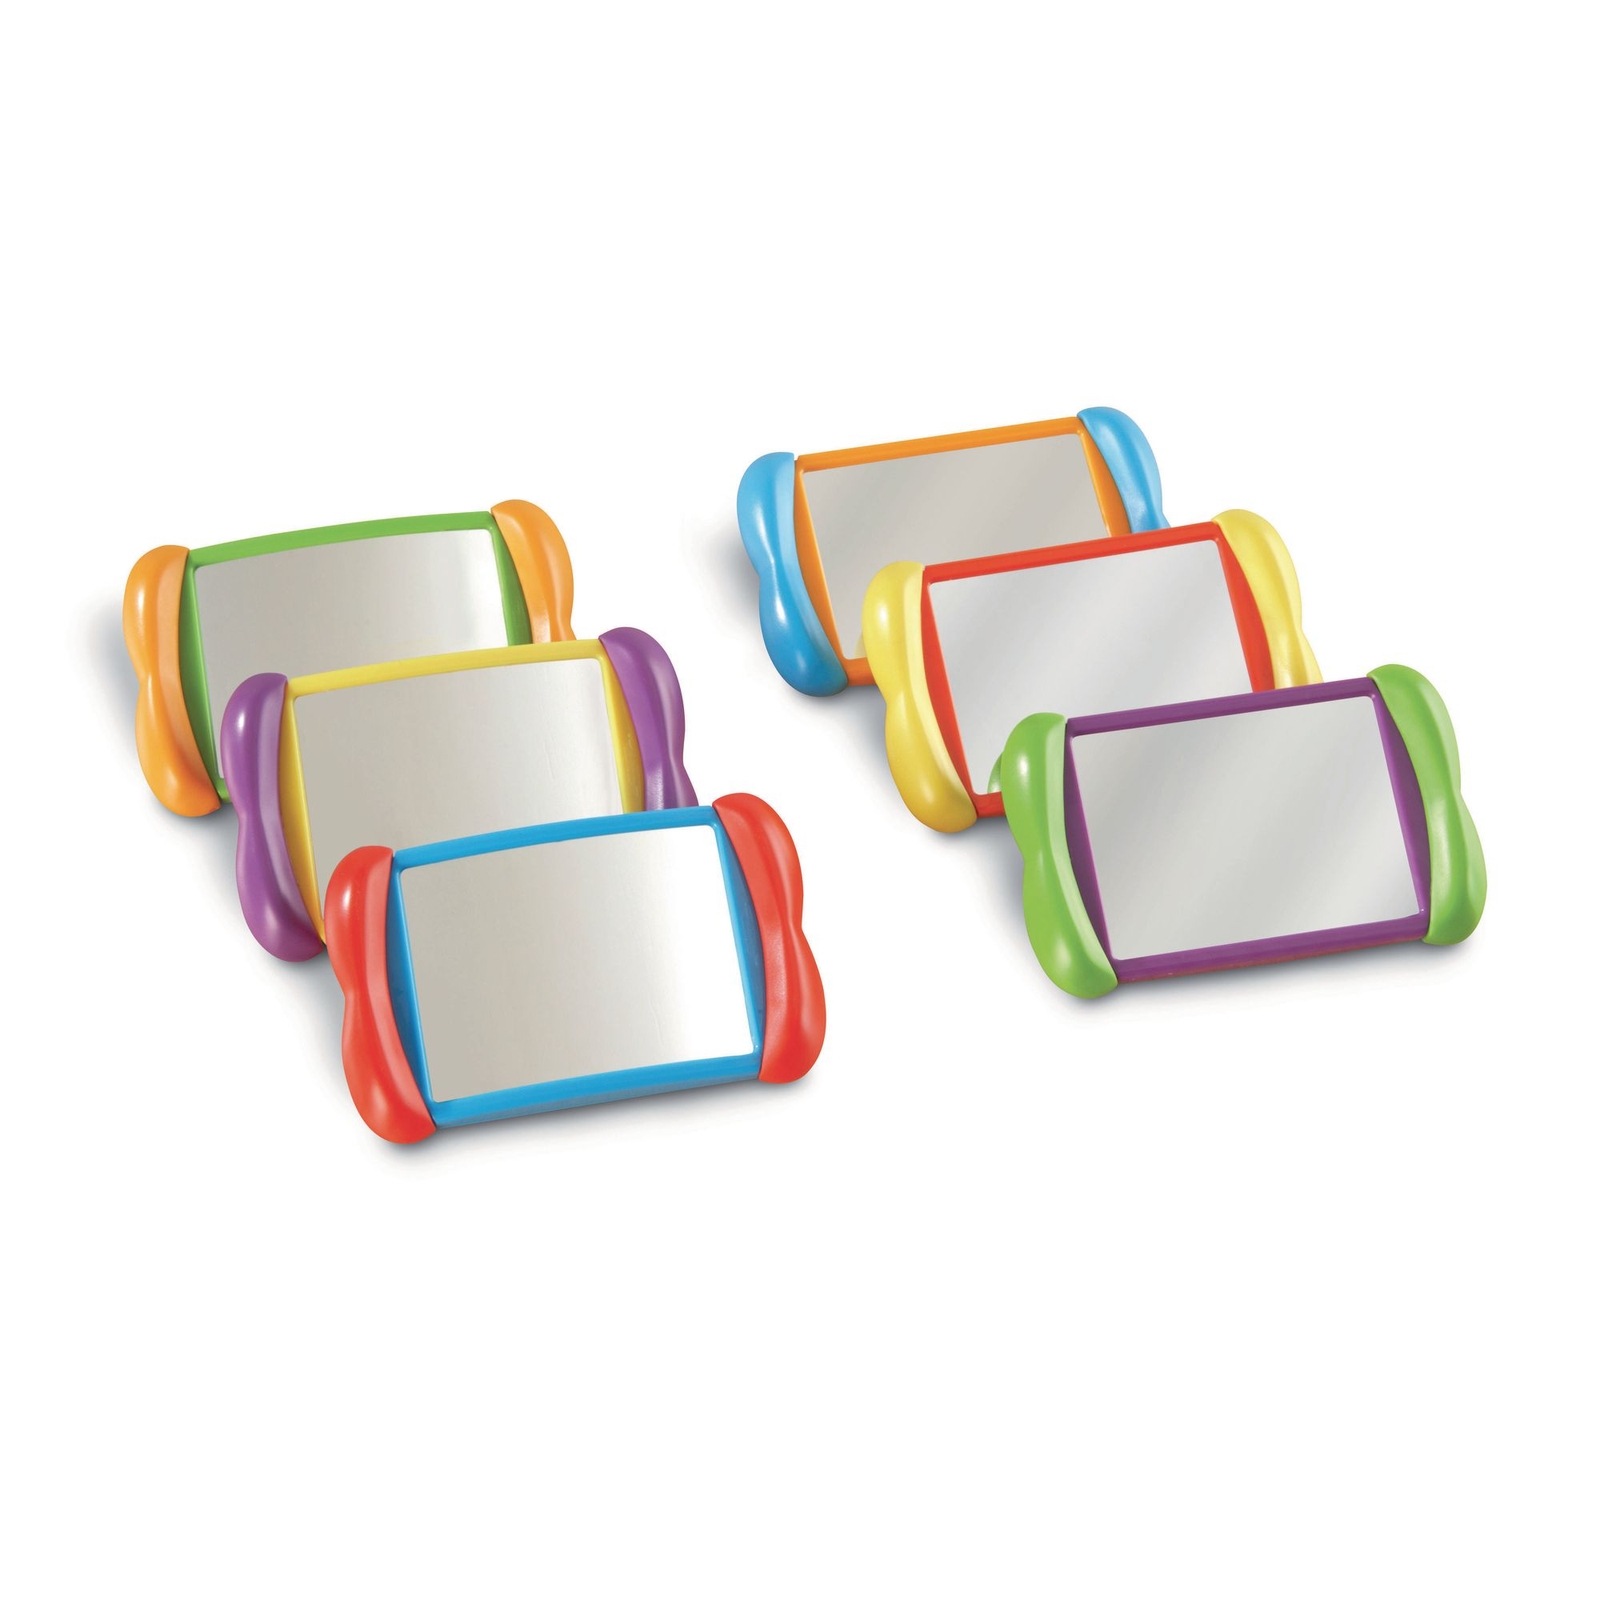 All about me mirrors Pack of 6